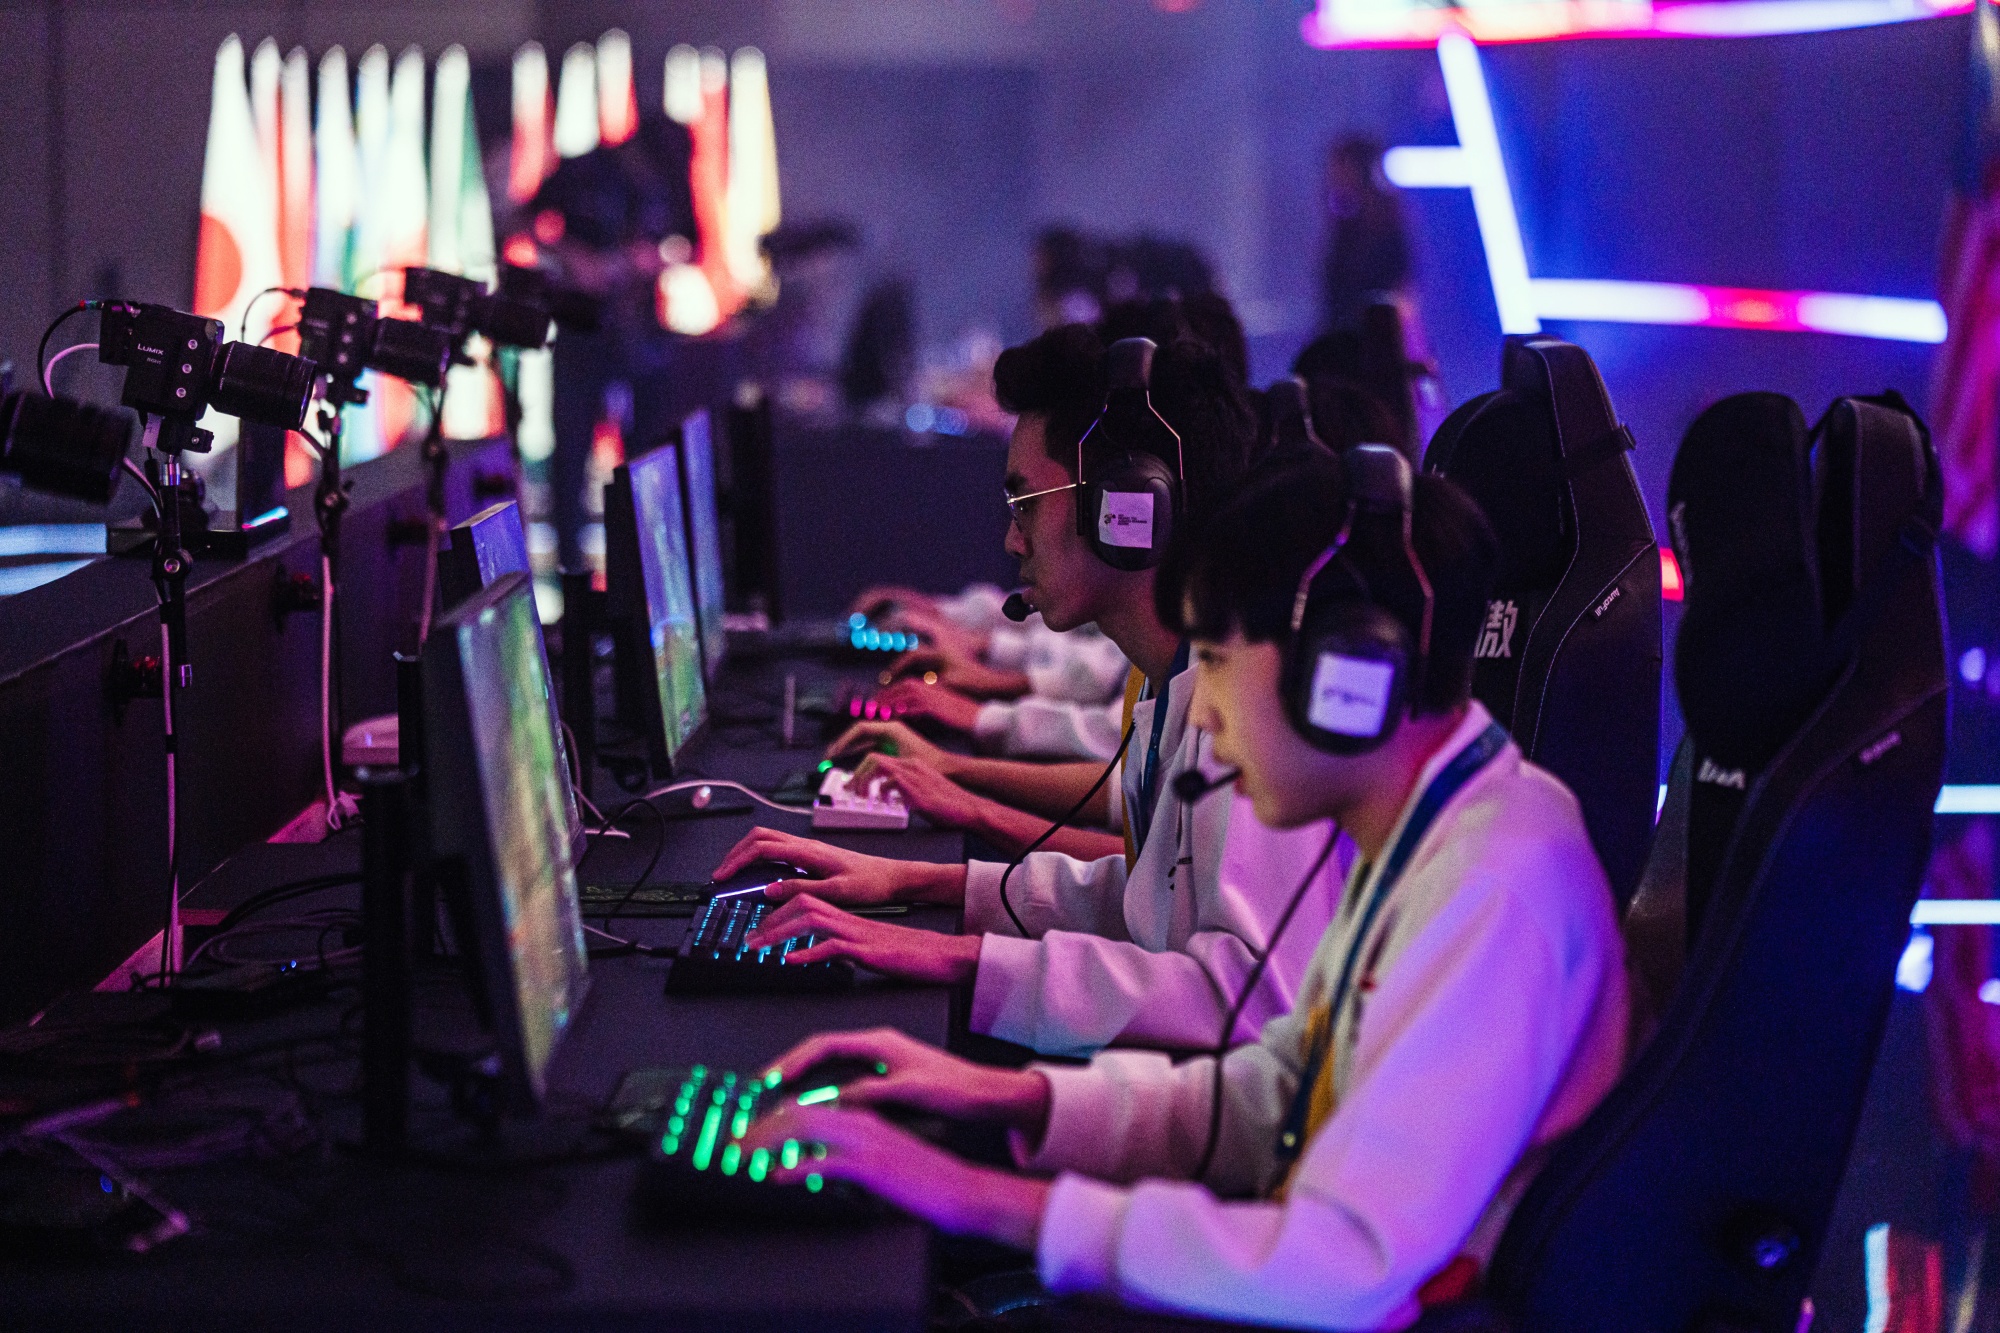 China bans kids from playing online video games during the week